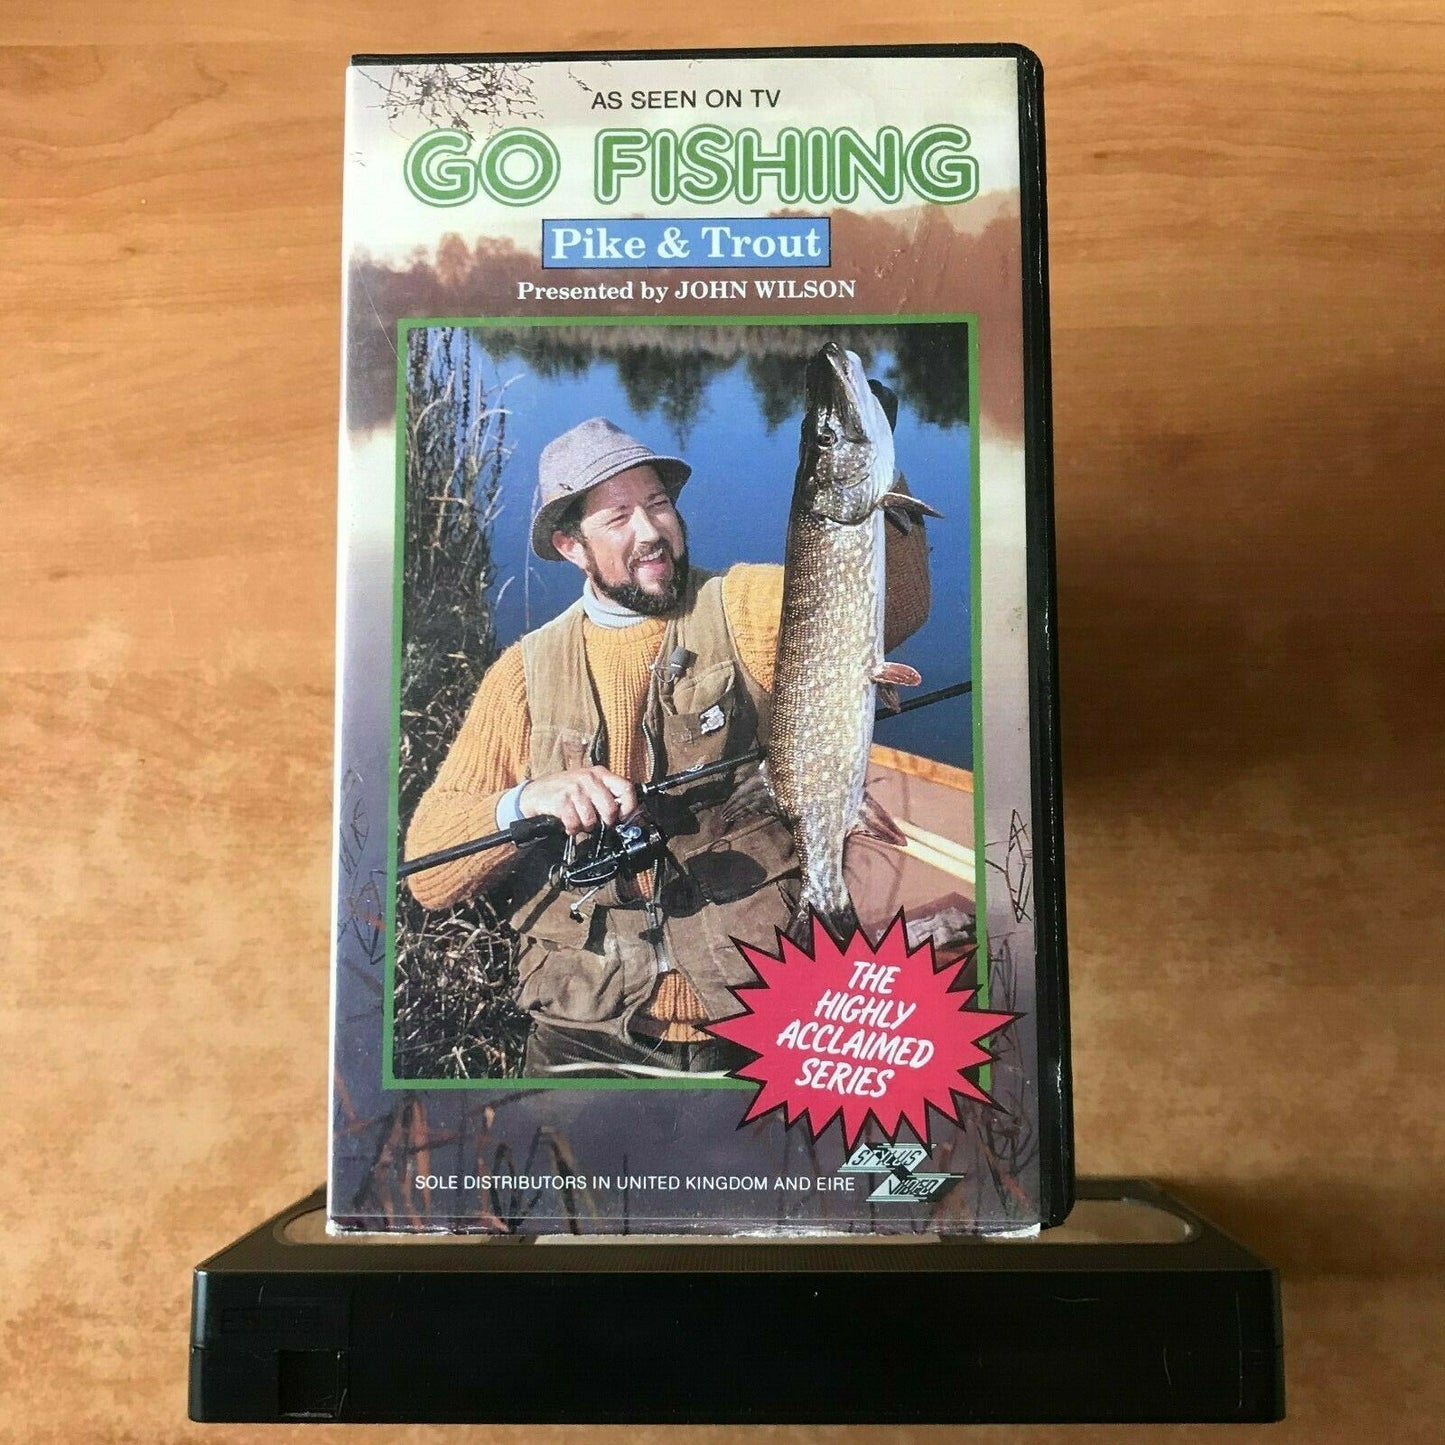 Go Fishing: Pike And Trout (Stylus Video); [John Wilson] TV Series - Pal VHS-